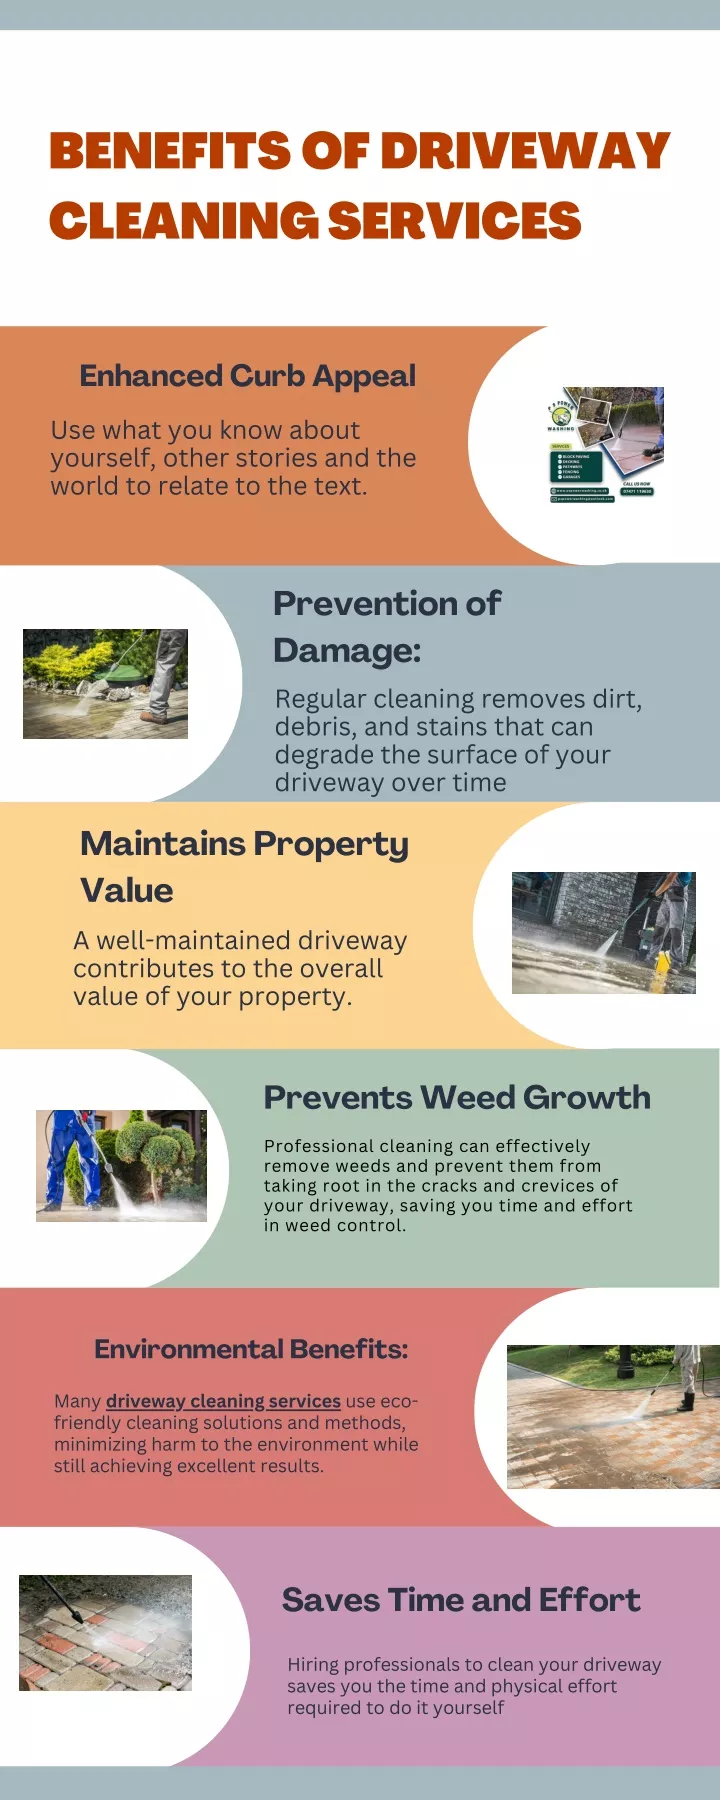 benefits of driveway cleaning services